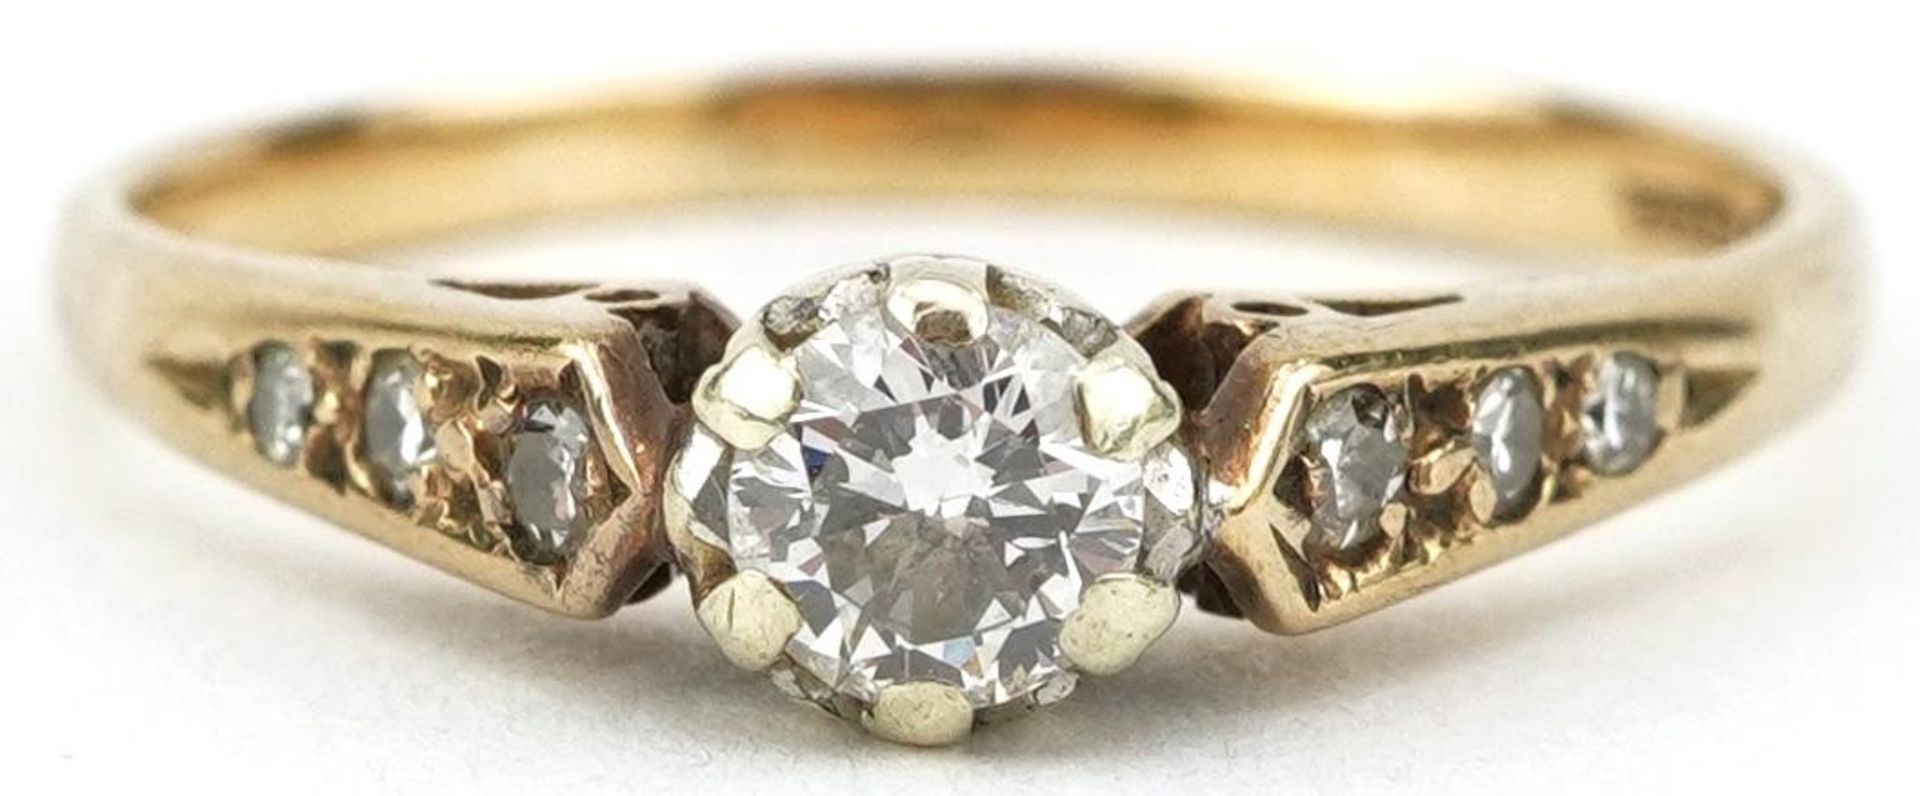 9ct gold diamond solitaire ring with diamond set shoulders, the central diamond approximately 0.20